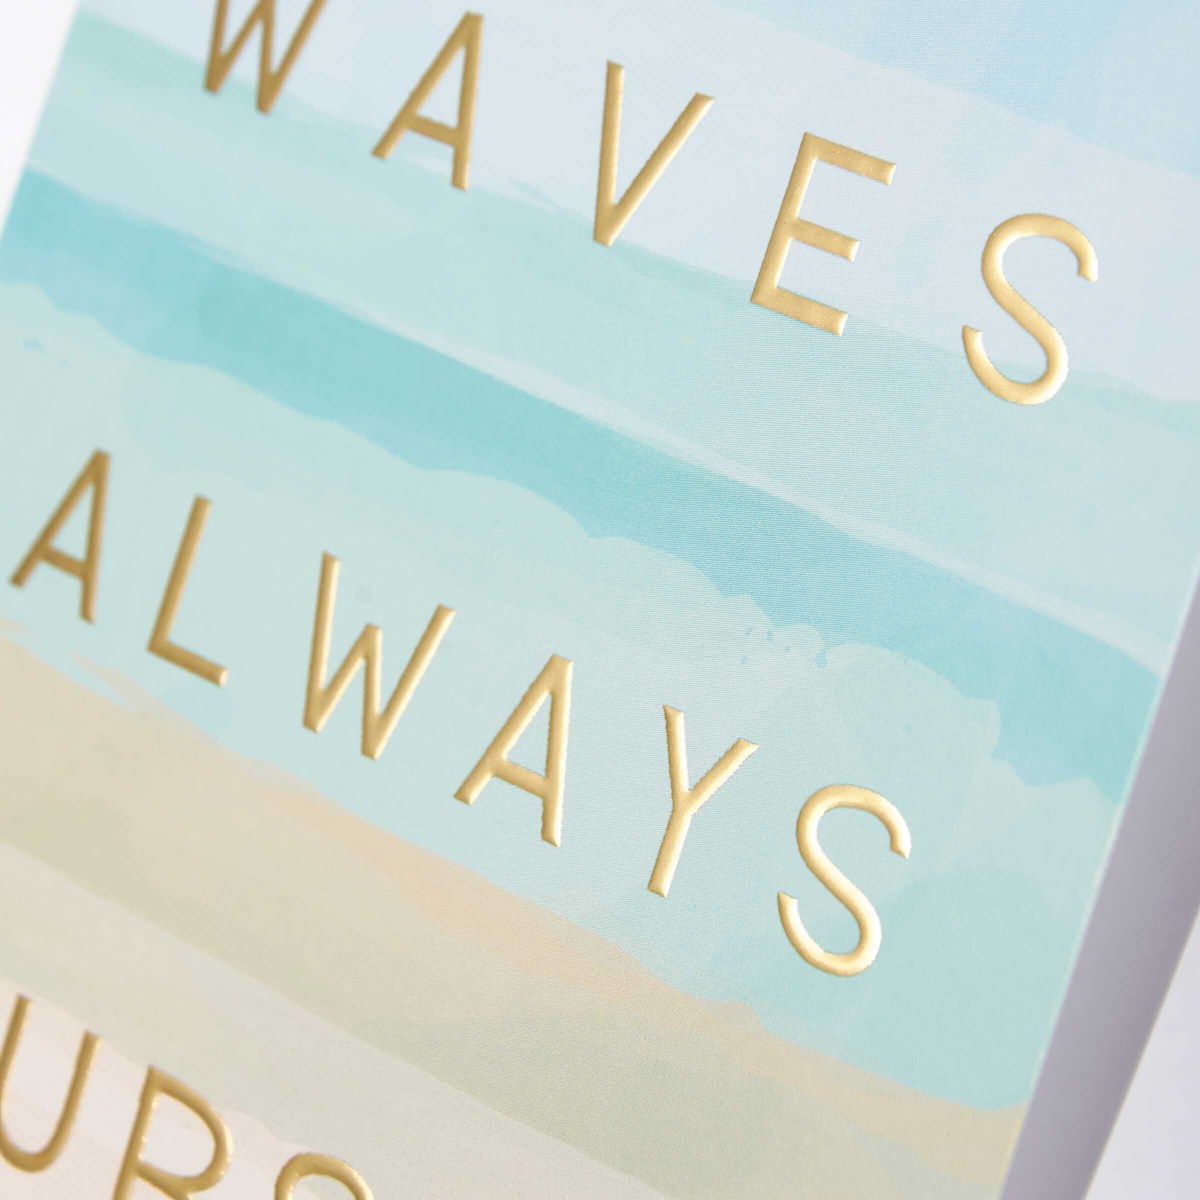 Rough Waves Always Subside Greeting Card - Paper